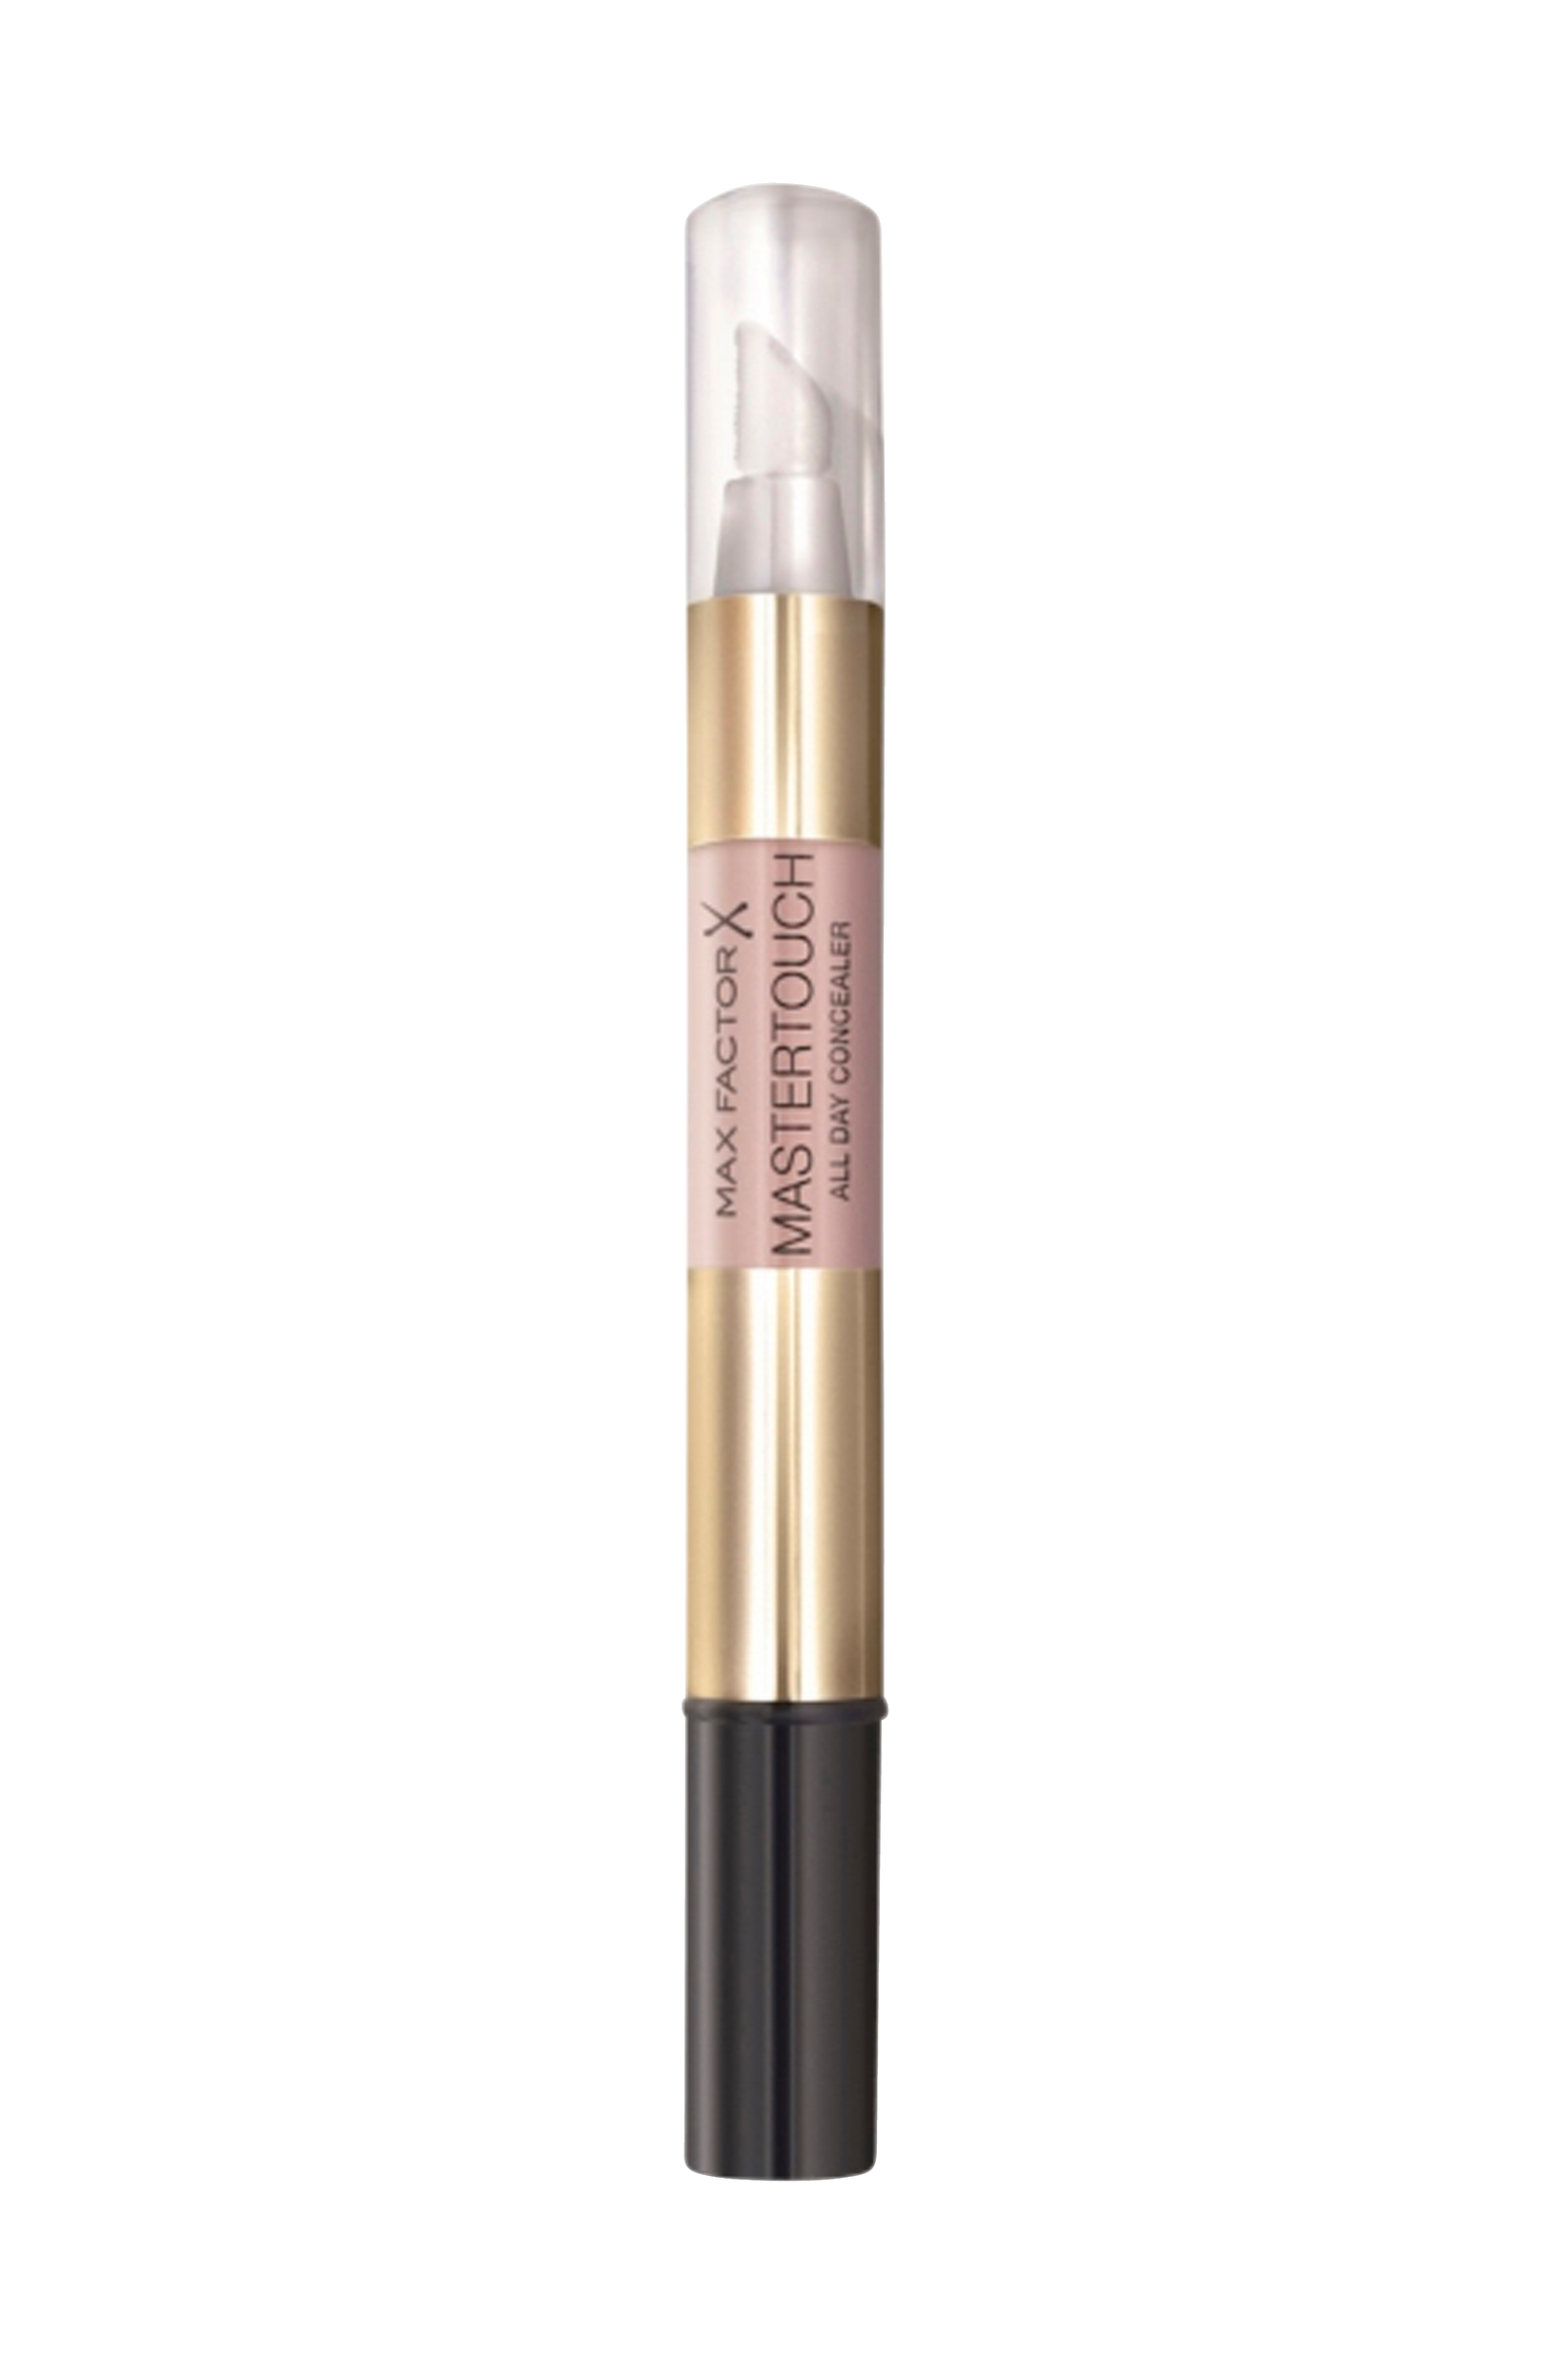 Mastertouch Concealer, Max Factor